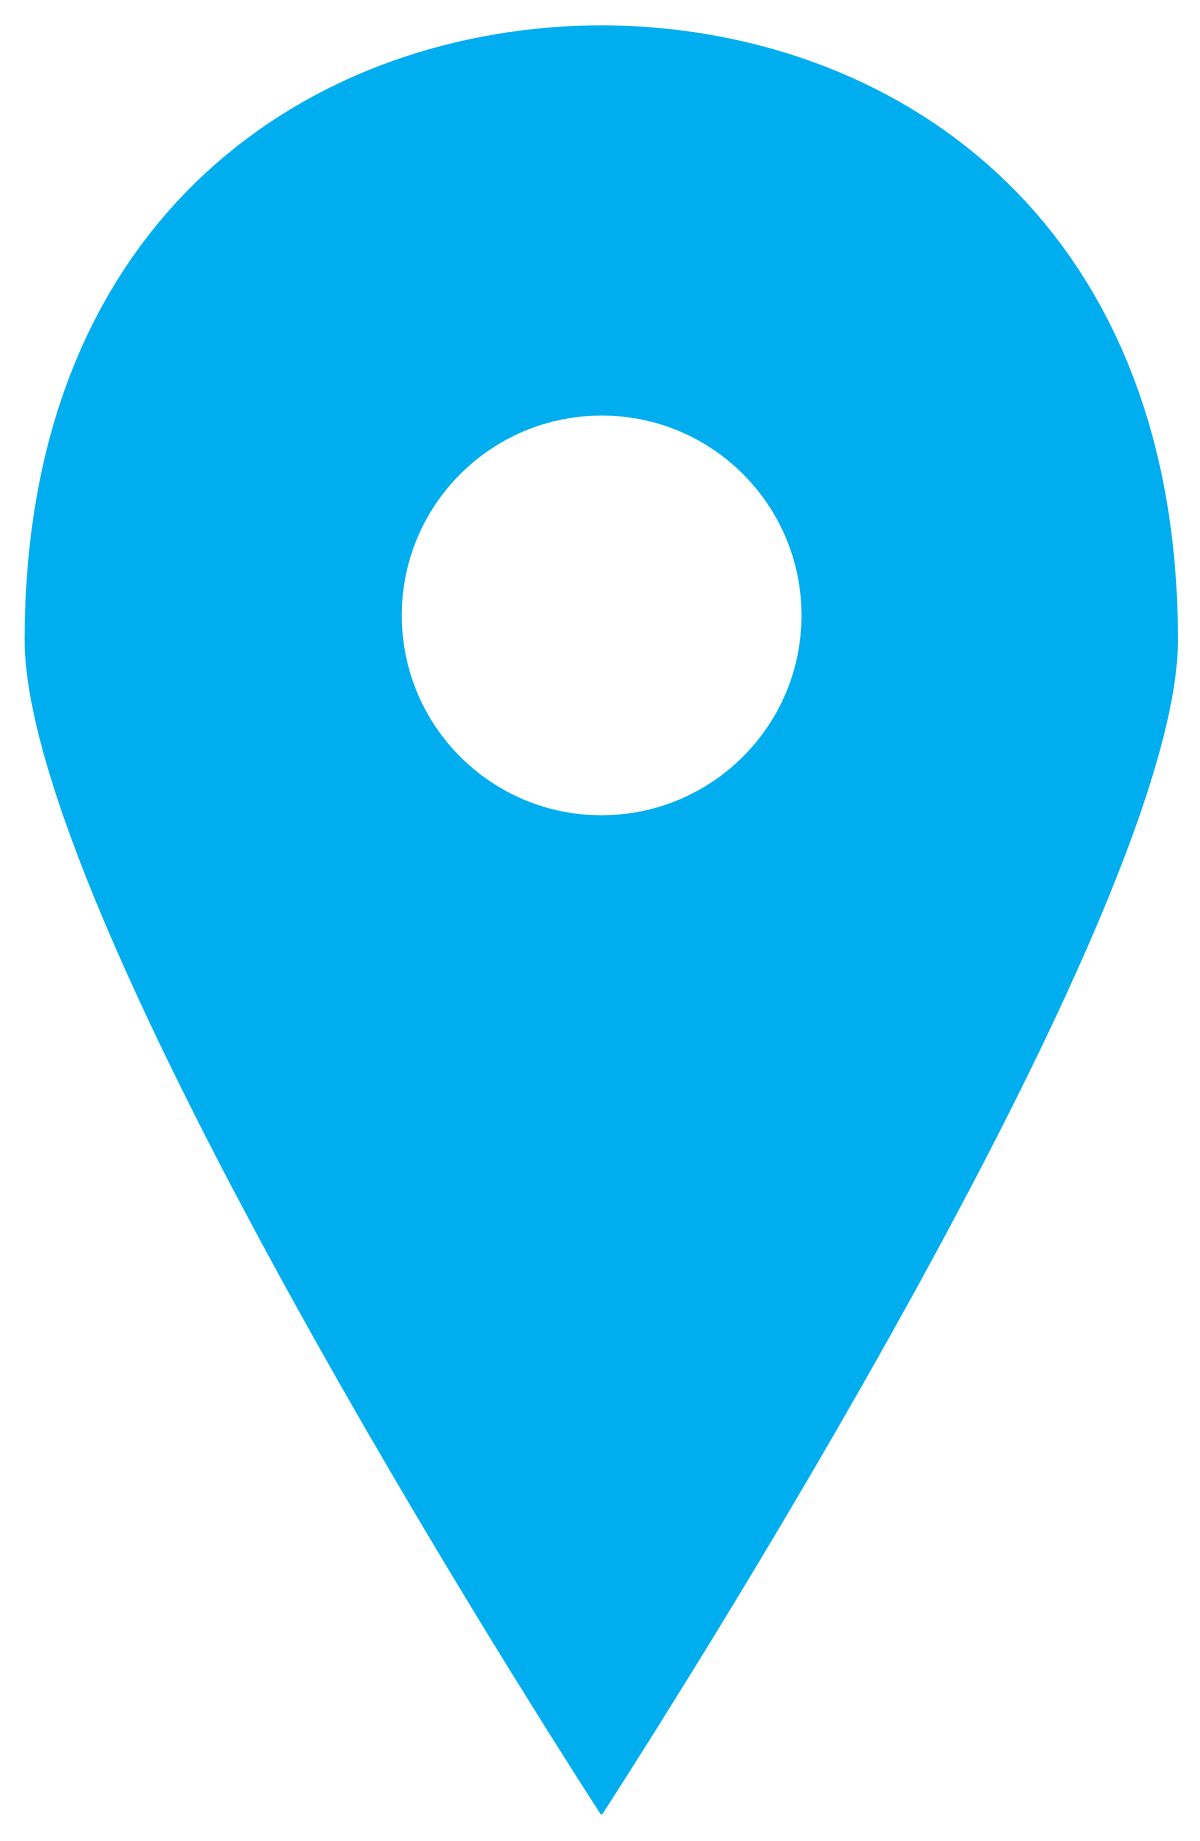 Download File:Map marker.svg - Wikimedia Commons